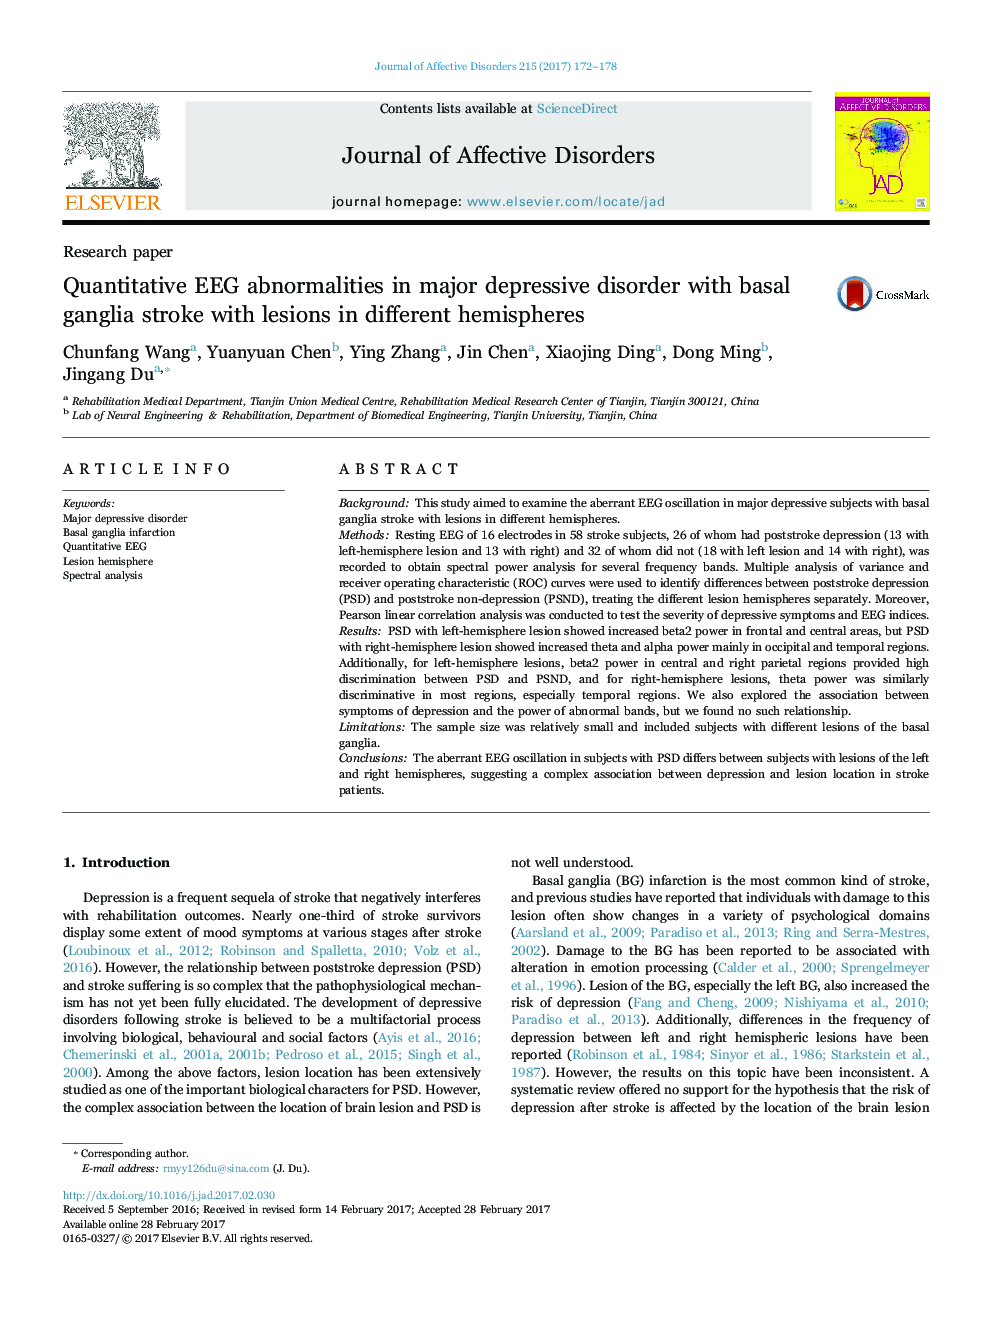 Research paperQuantitative EEG abnormalities in major depressive disorder with basal ganglia stroke with lesions in different hemispheres